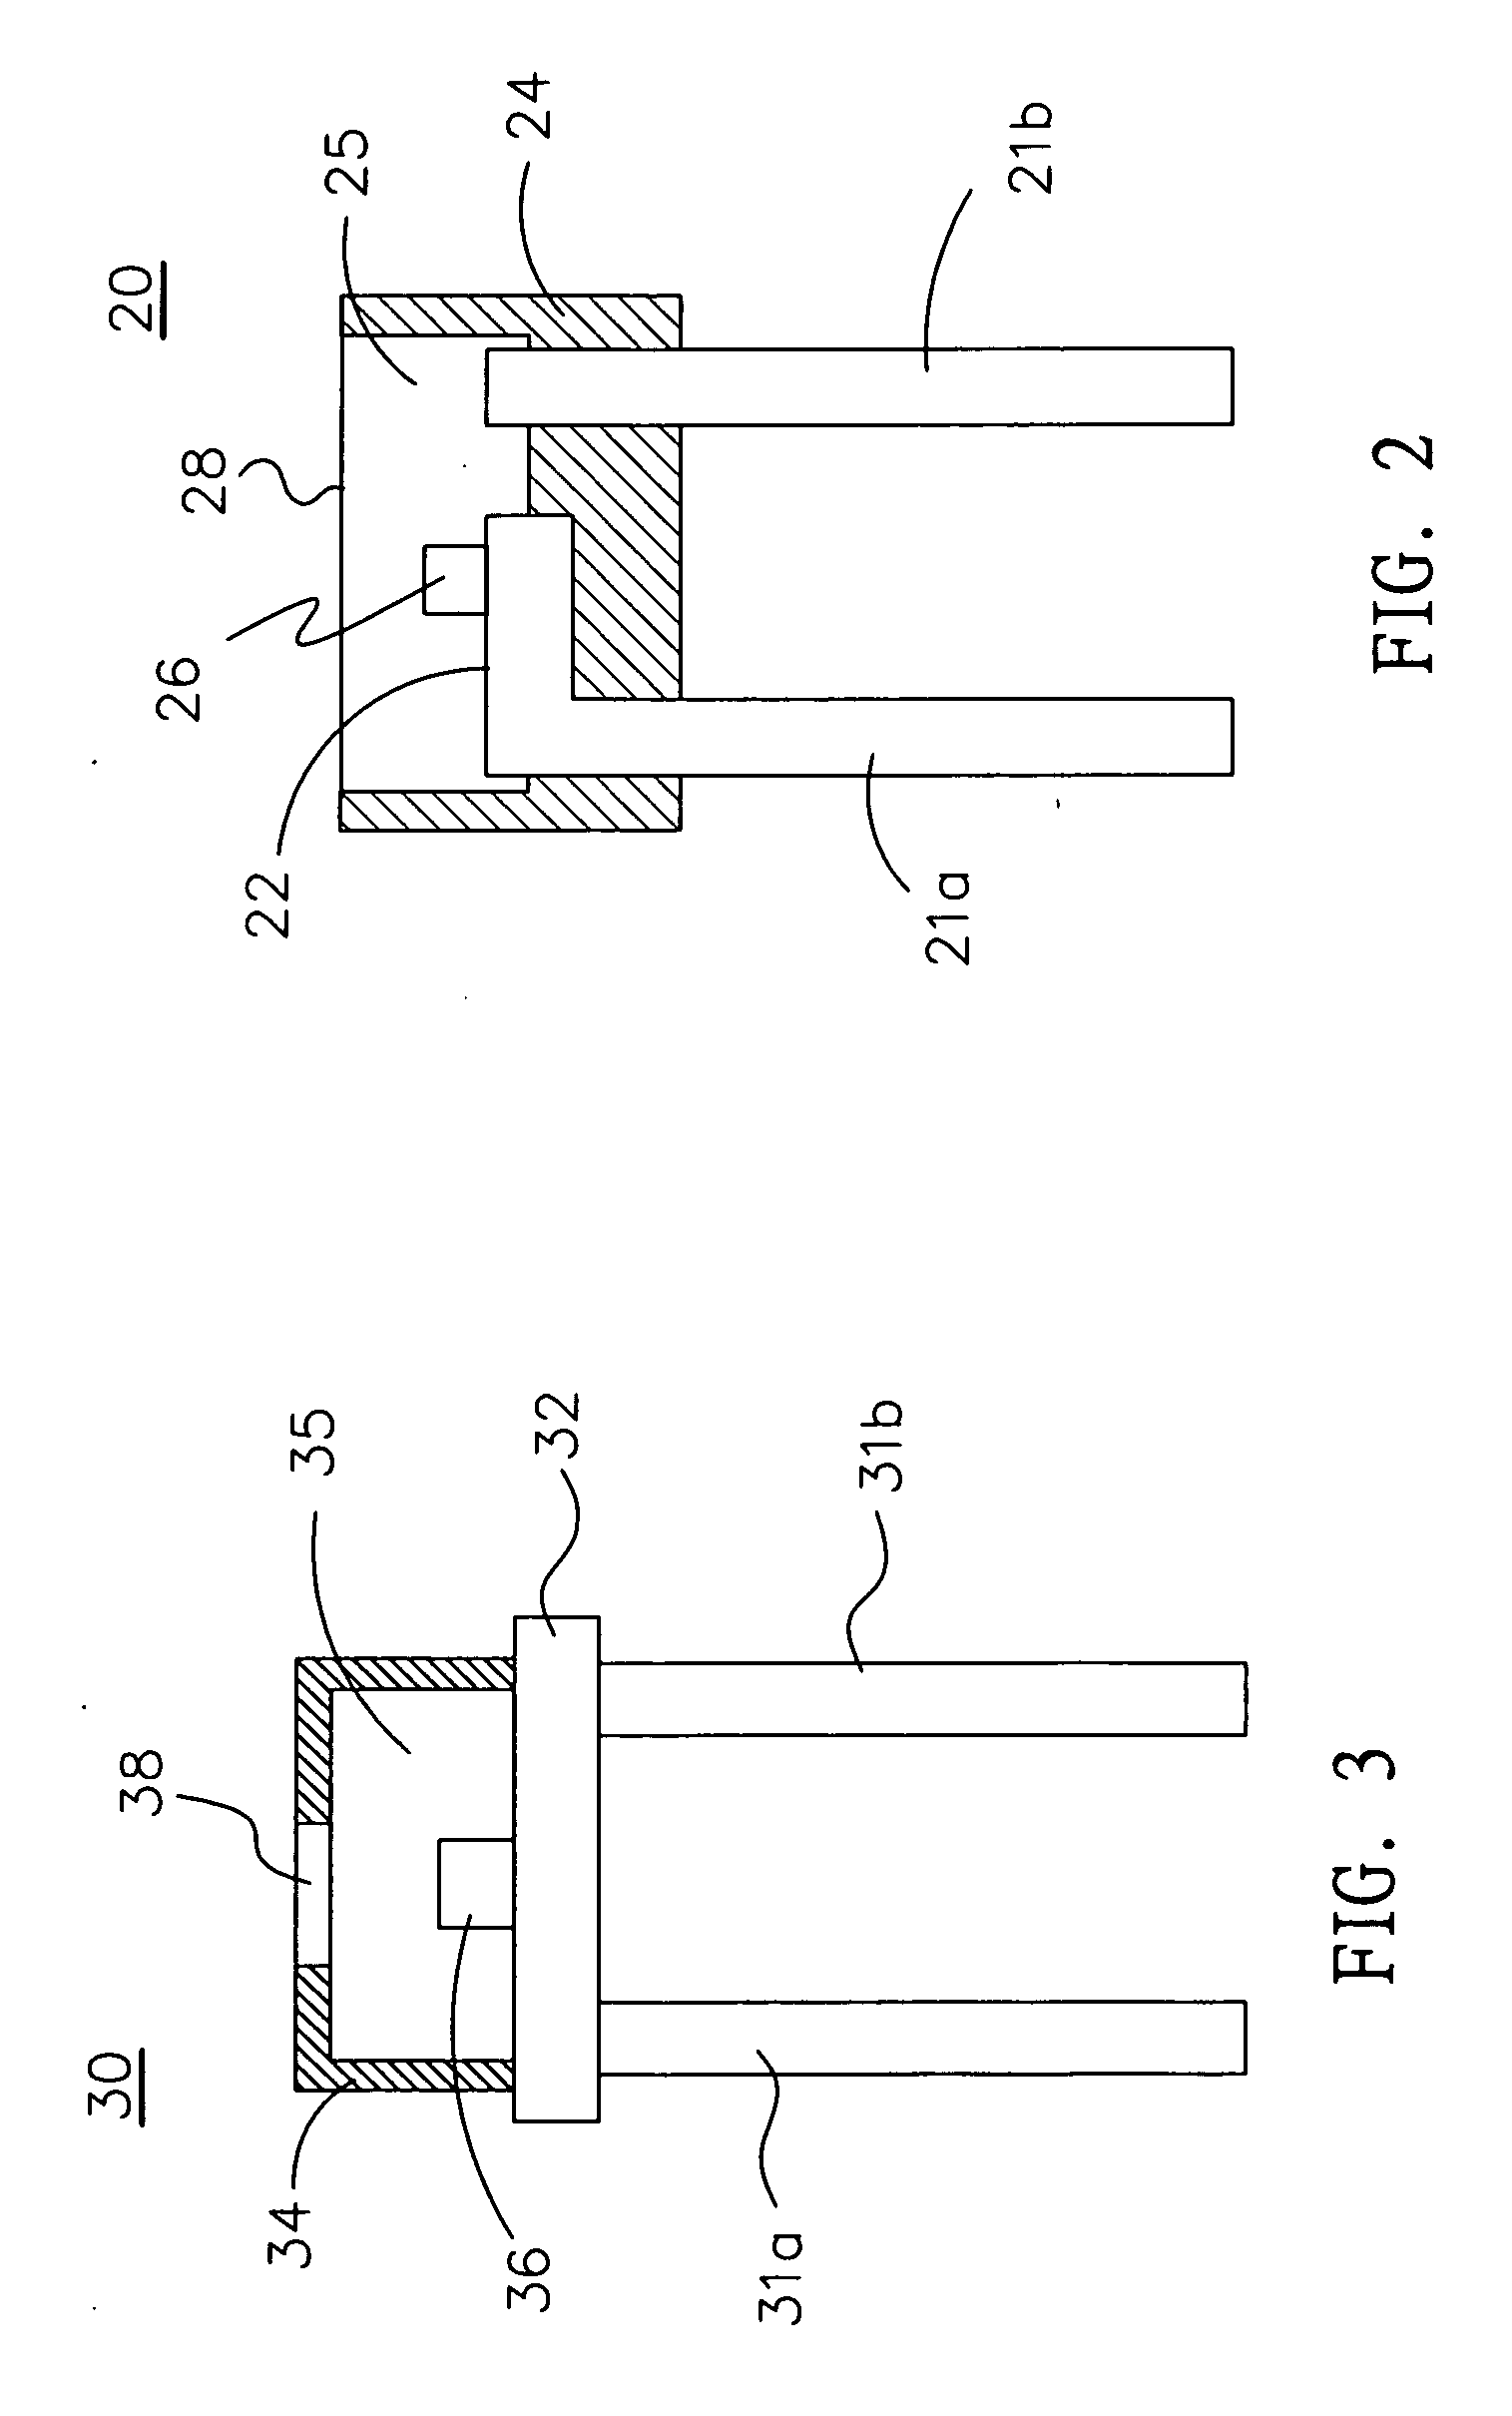 Optoelectronic component and optical subassembly for optical communication